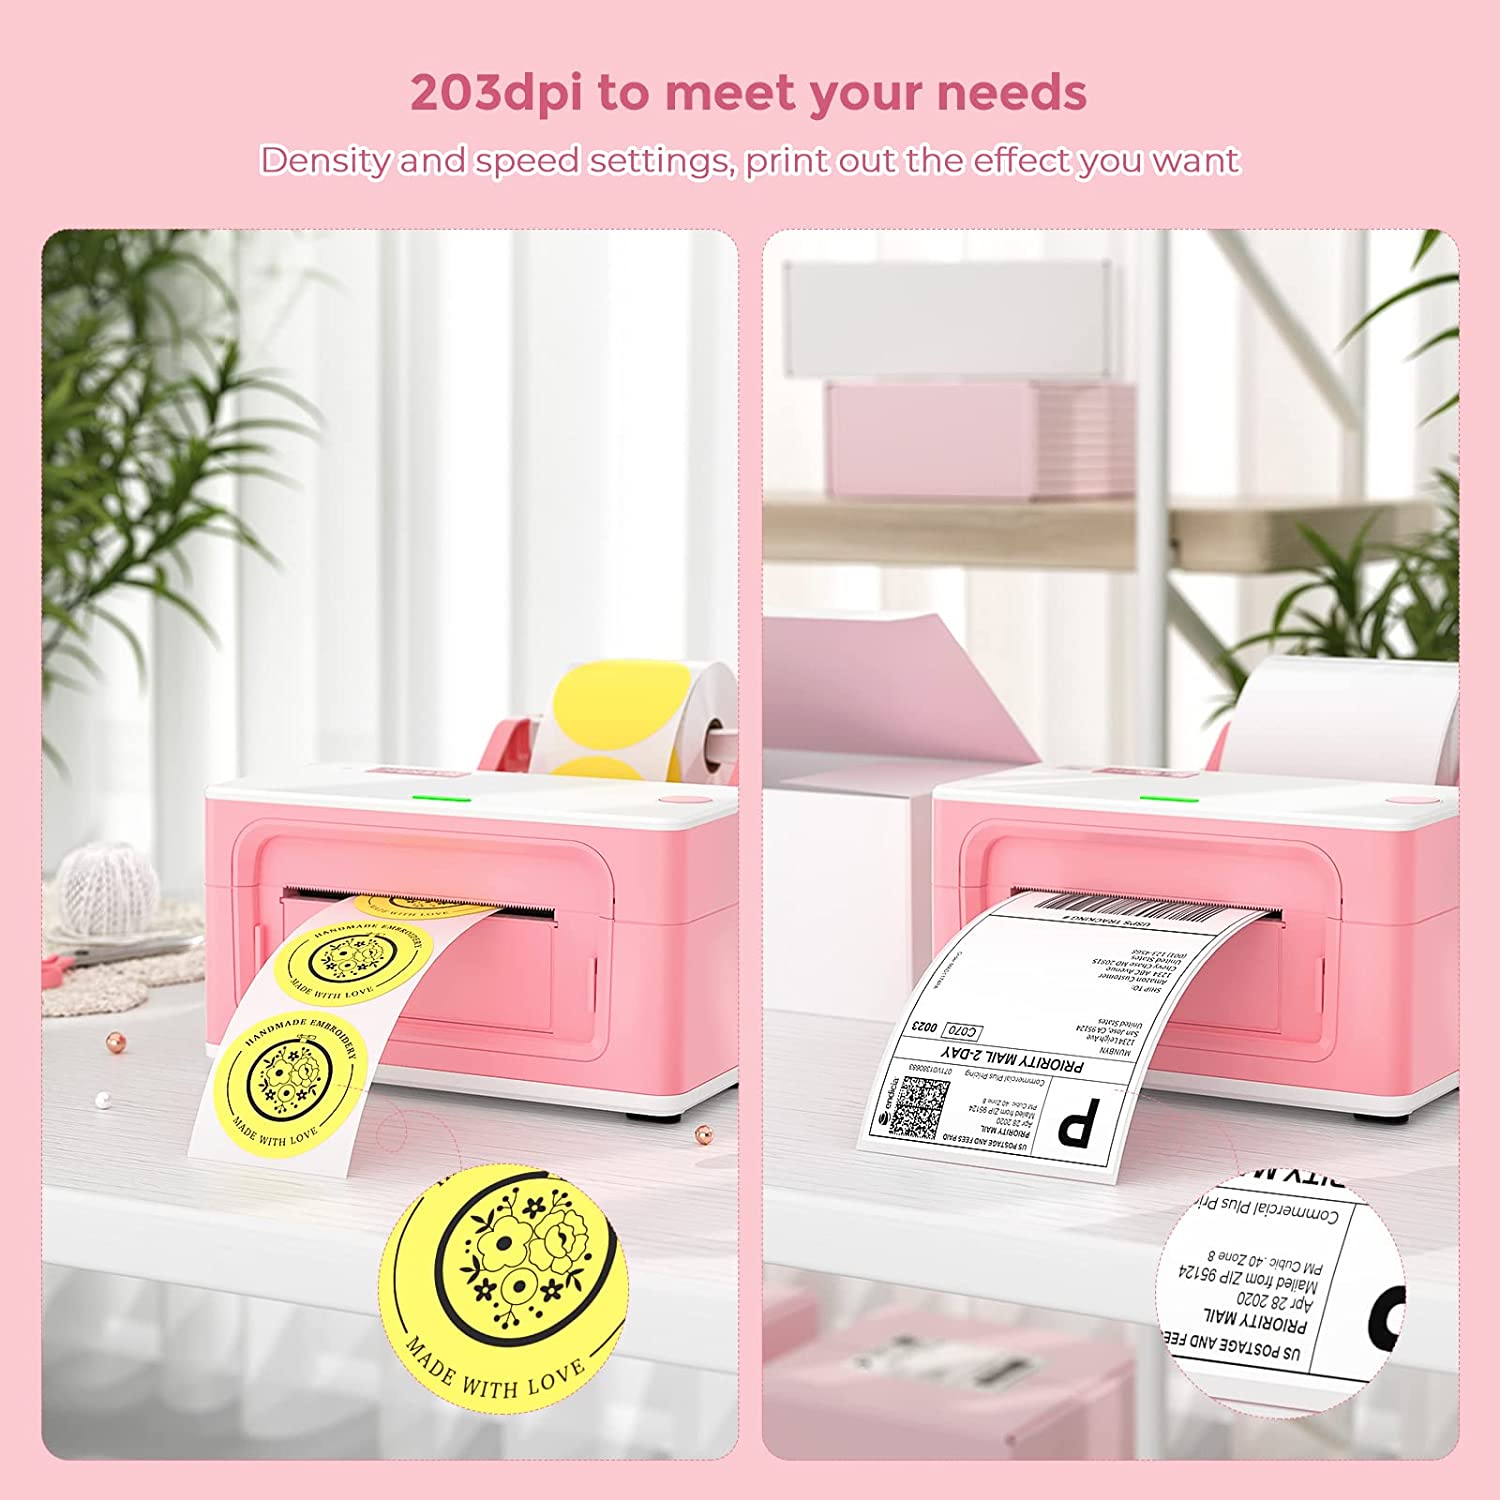 my pink thermal label printer! 💞👛💝 products tagged on my  sto, munbyn thermal printer